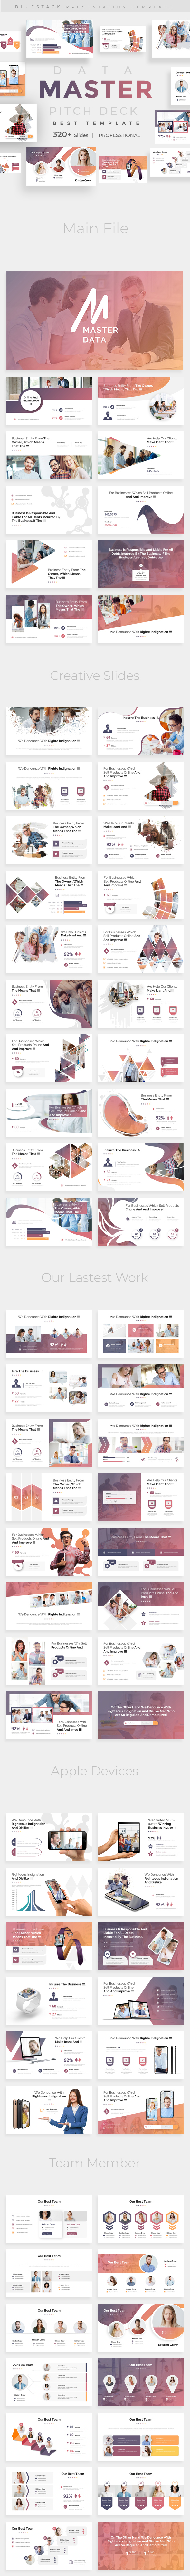 Master Data Pitch Deck Powerpoint Template